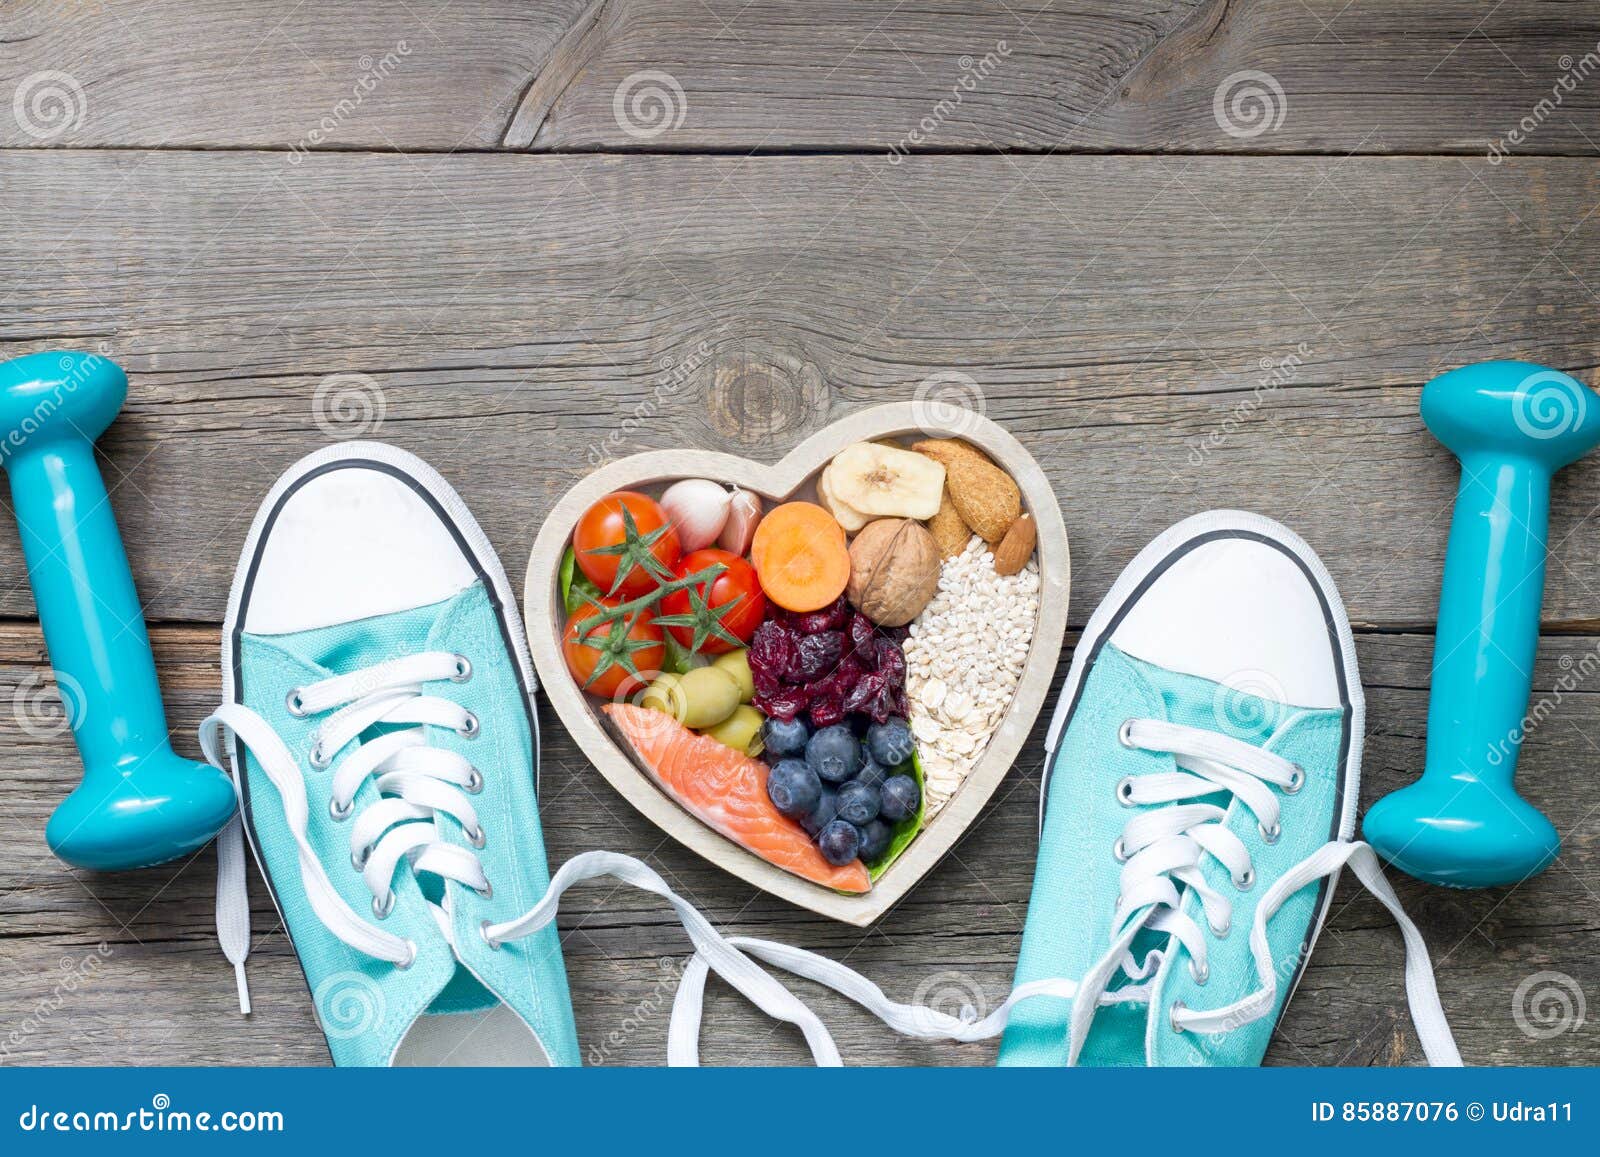 healthy lifestyle concept with food in heart and sports fitness accessories